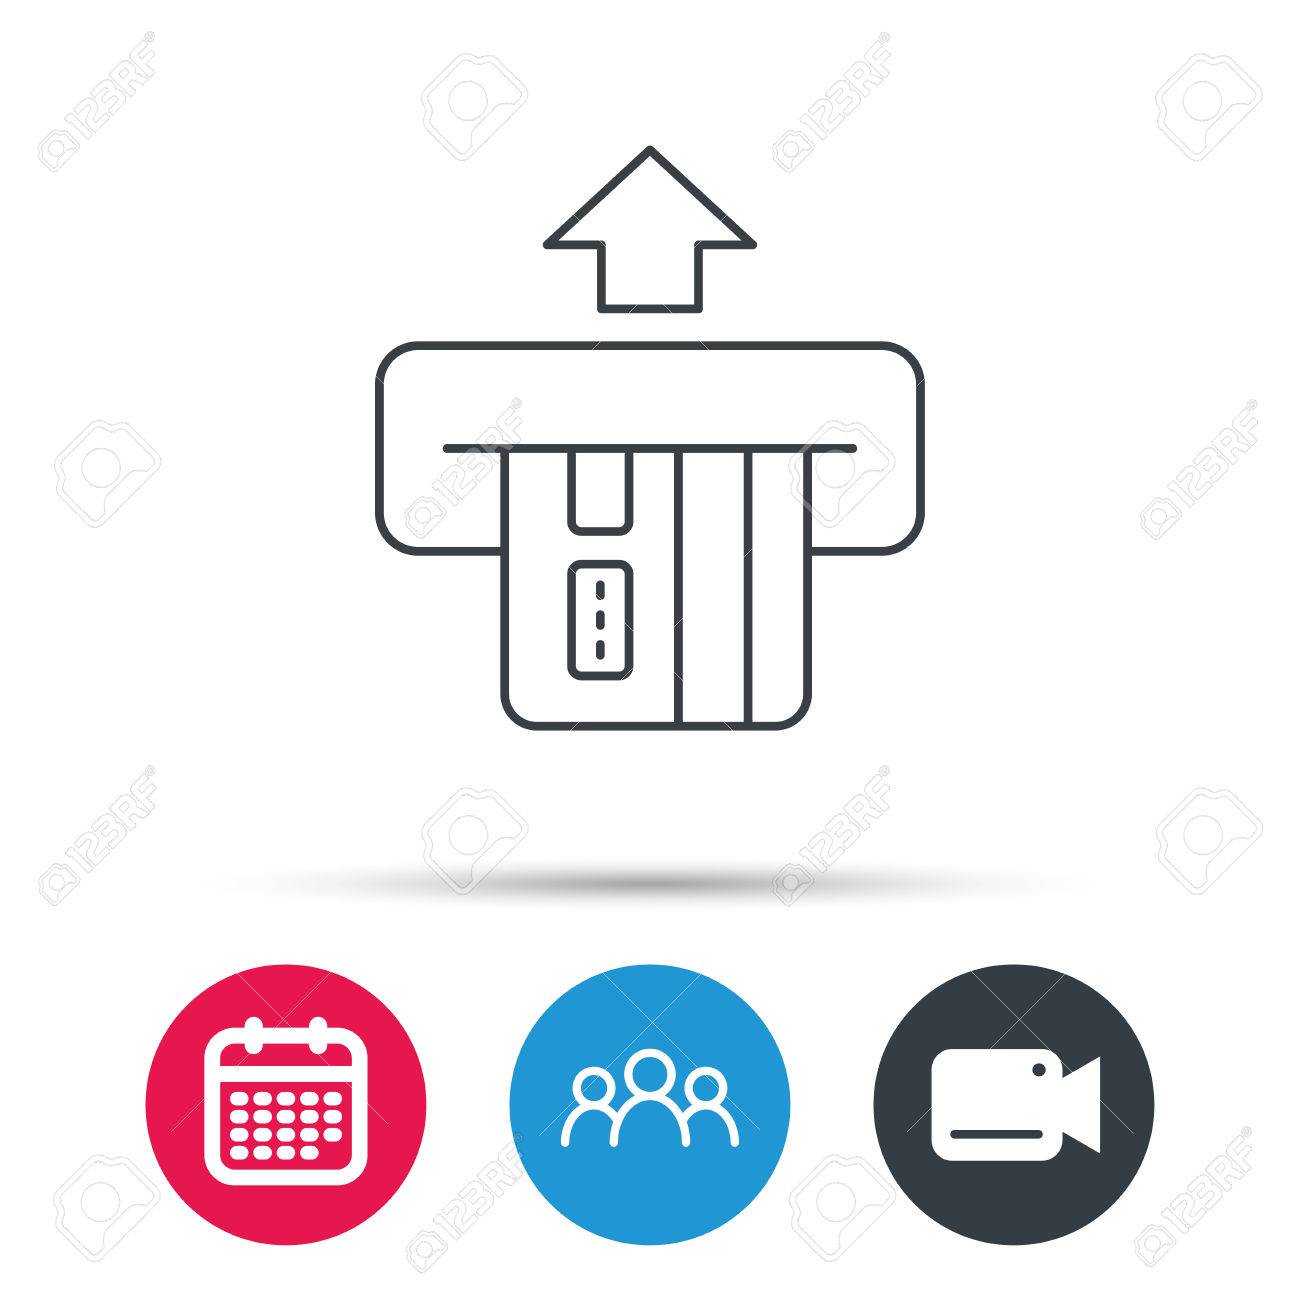 Atm, banking, card, credit, insert, money, withdrawal icon | Icon 